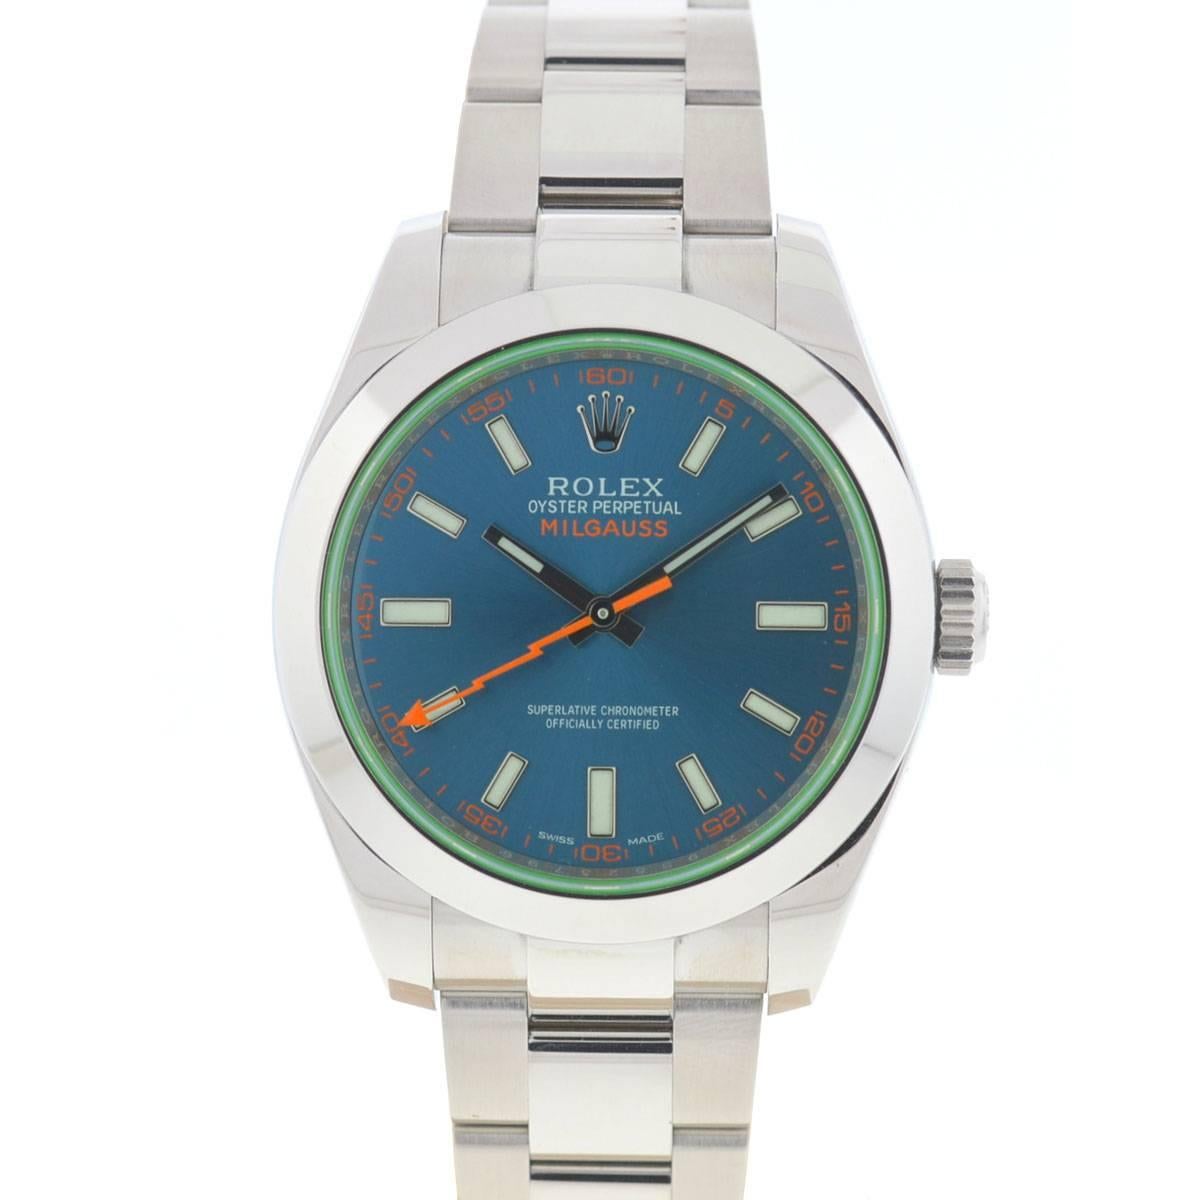 Company - Rolex
Style - Dress/Formal
Model - Milgauss Blue
Reference Number - 116400GV Random Serial
Case Metal - Stainless Steel
Case Measurement - 40 mm 
Bracelet - Stainless Steel - Fits a 8